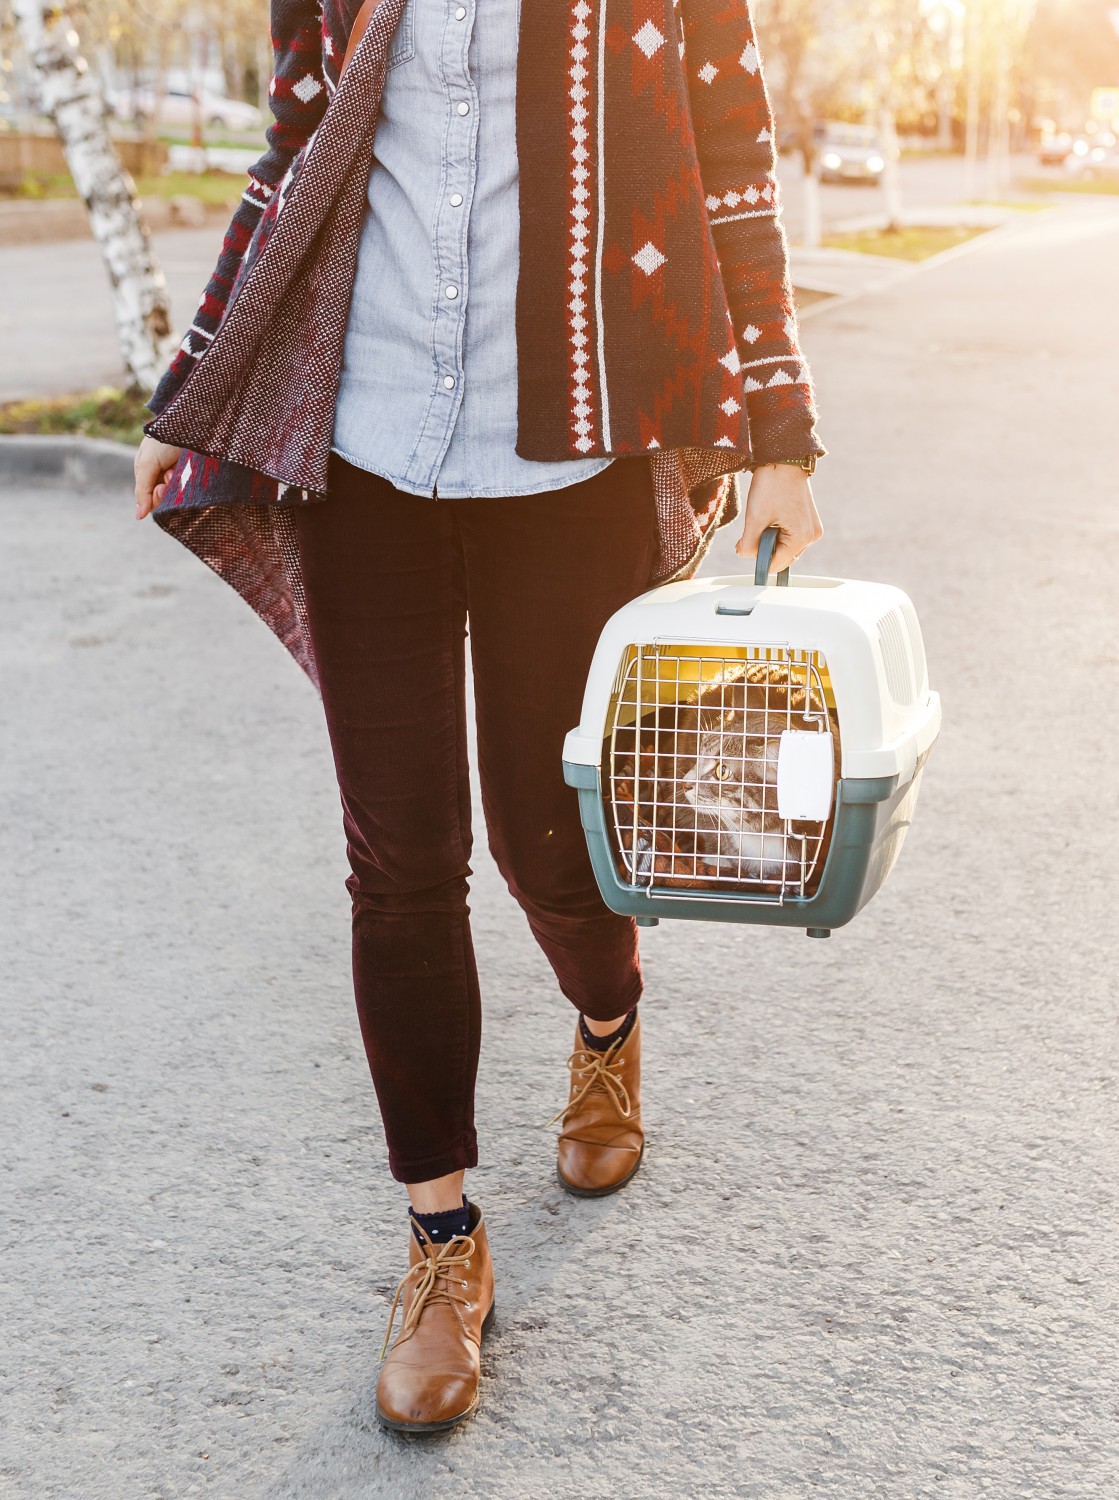 Person walking with cat in carrier